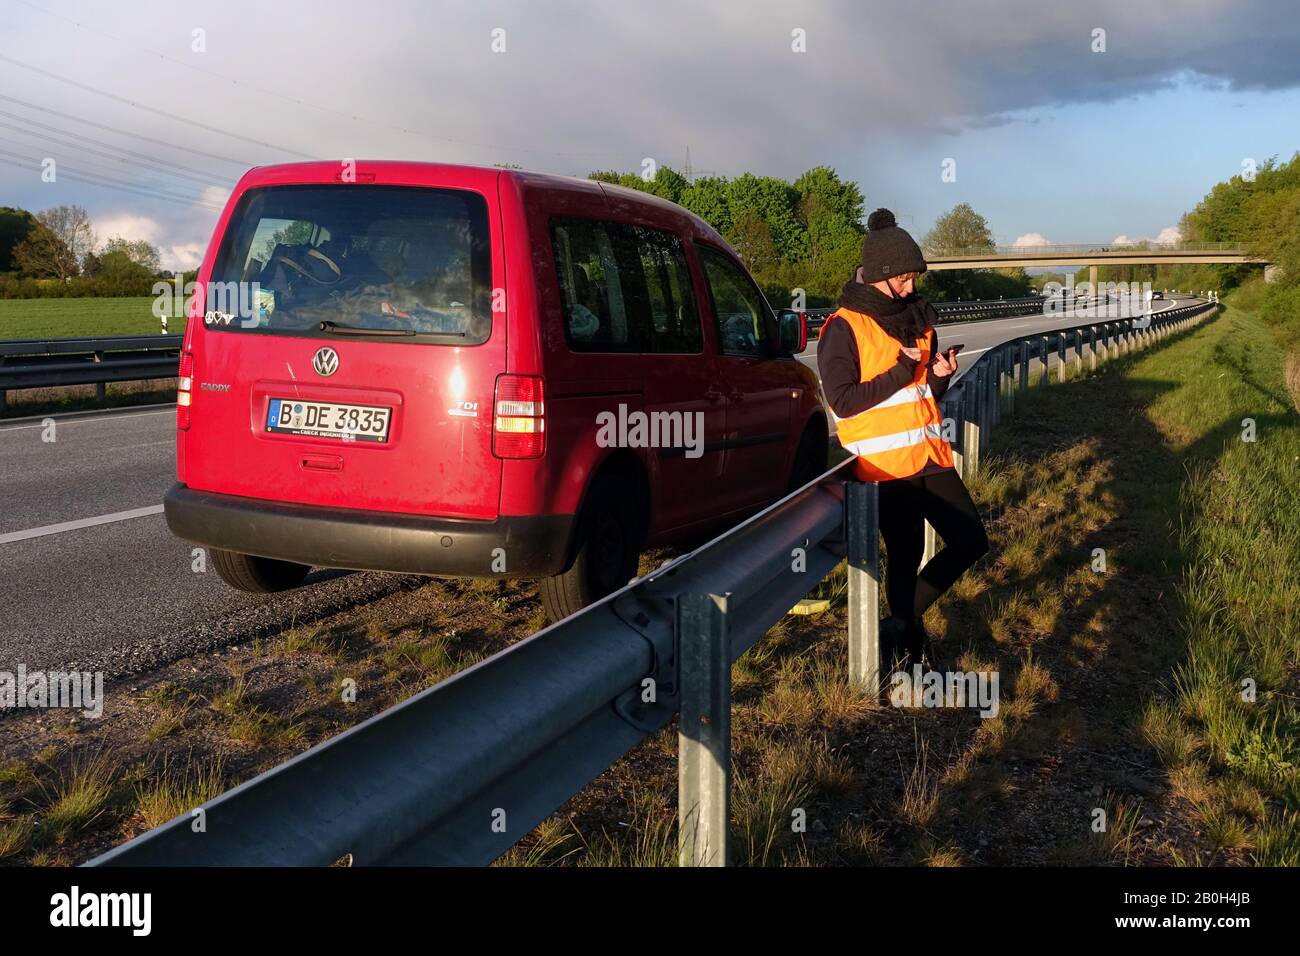 04.05.2019, Hamburg, Hamburg, Germany - Woman standing behind the crash barrier in a car breakdown on the A24 and looking at her mobile phone. 00S1905 Stock Photo